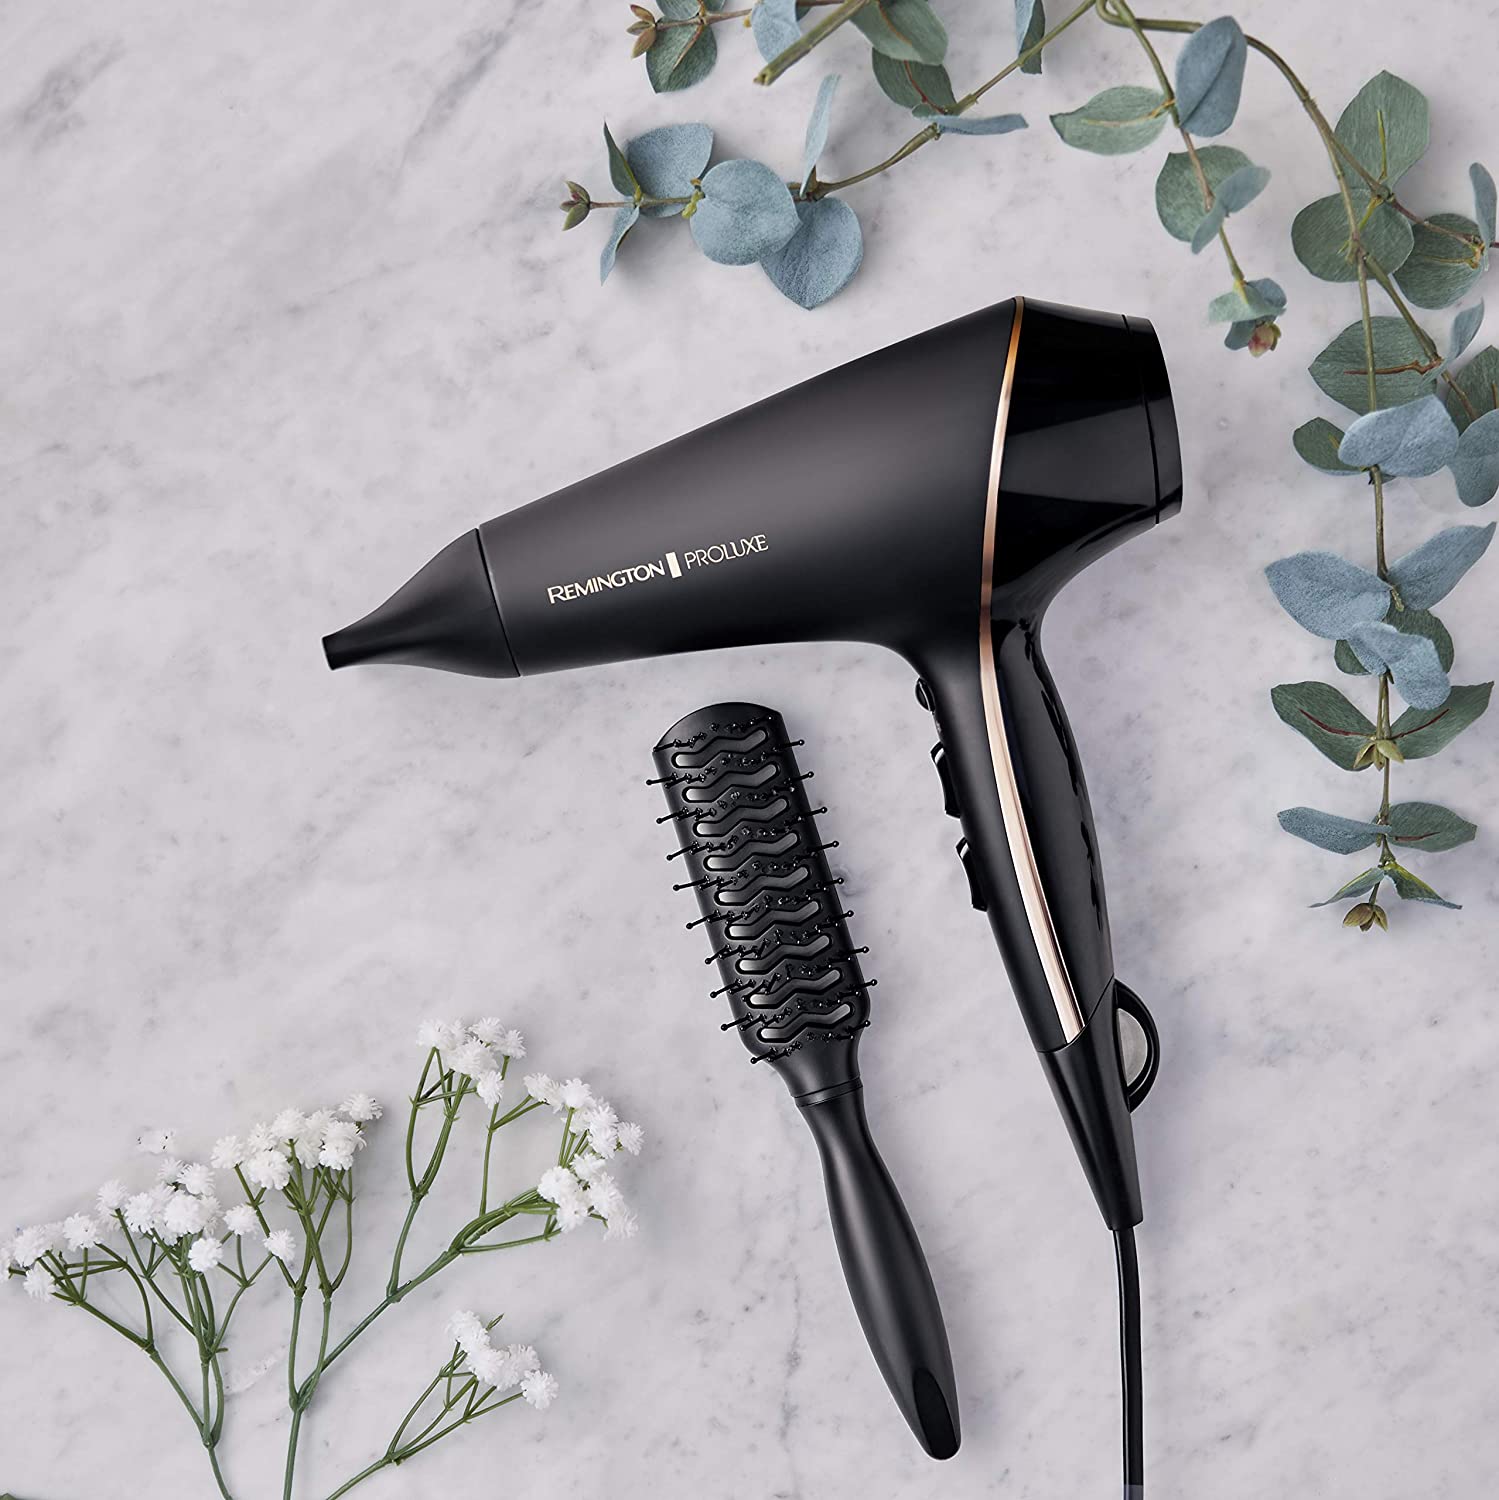 Remington AC9140B Proluxe Ionic Hair Dryer with Styling Shot and ...